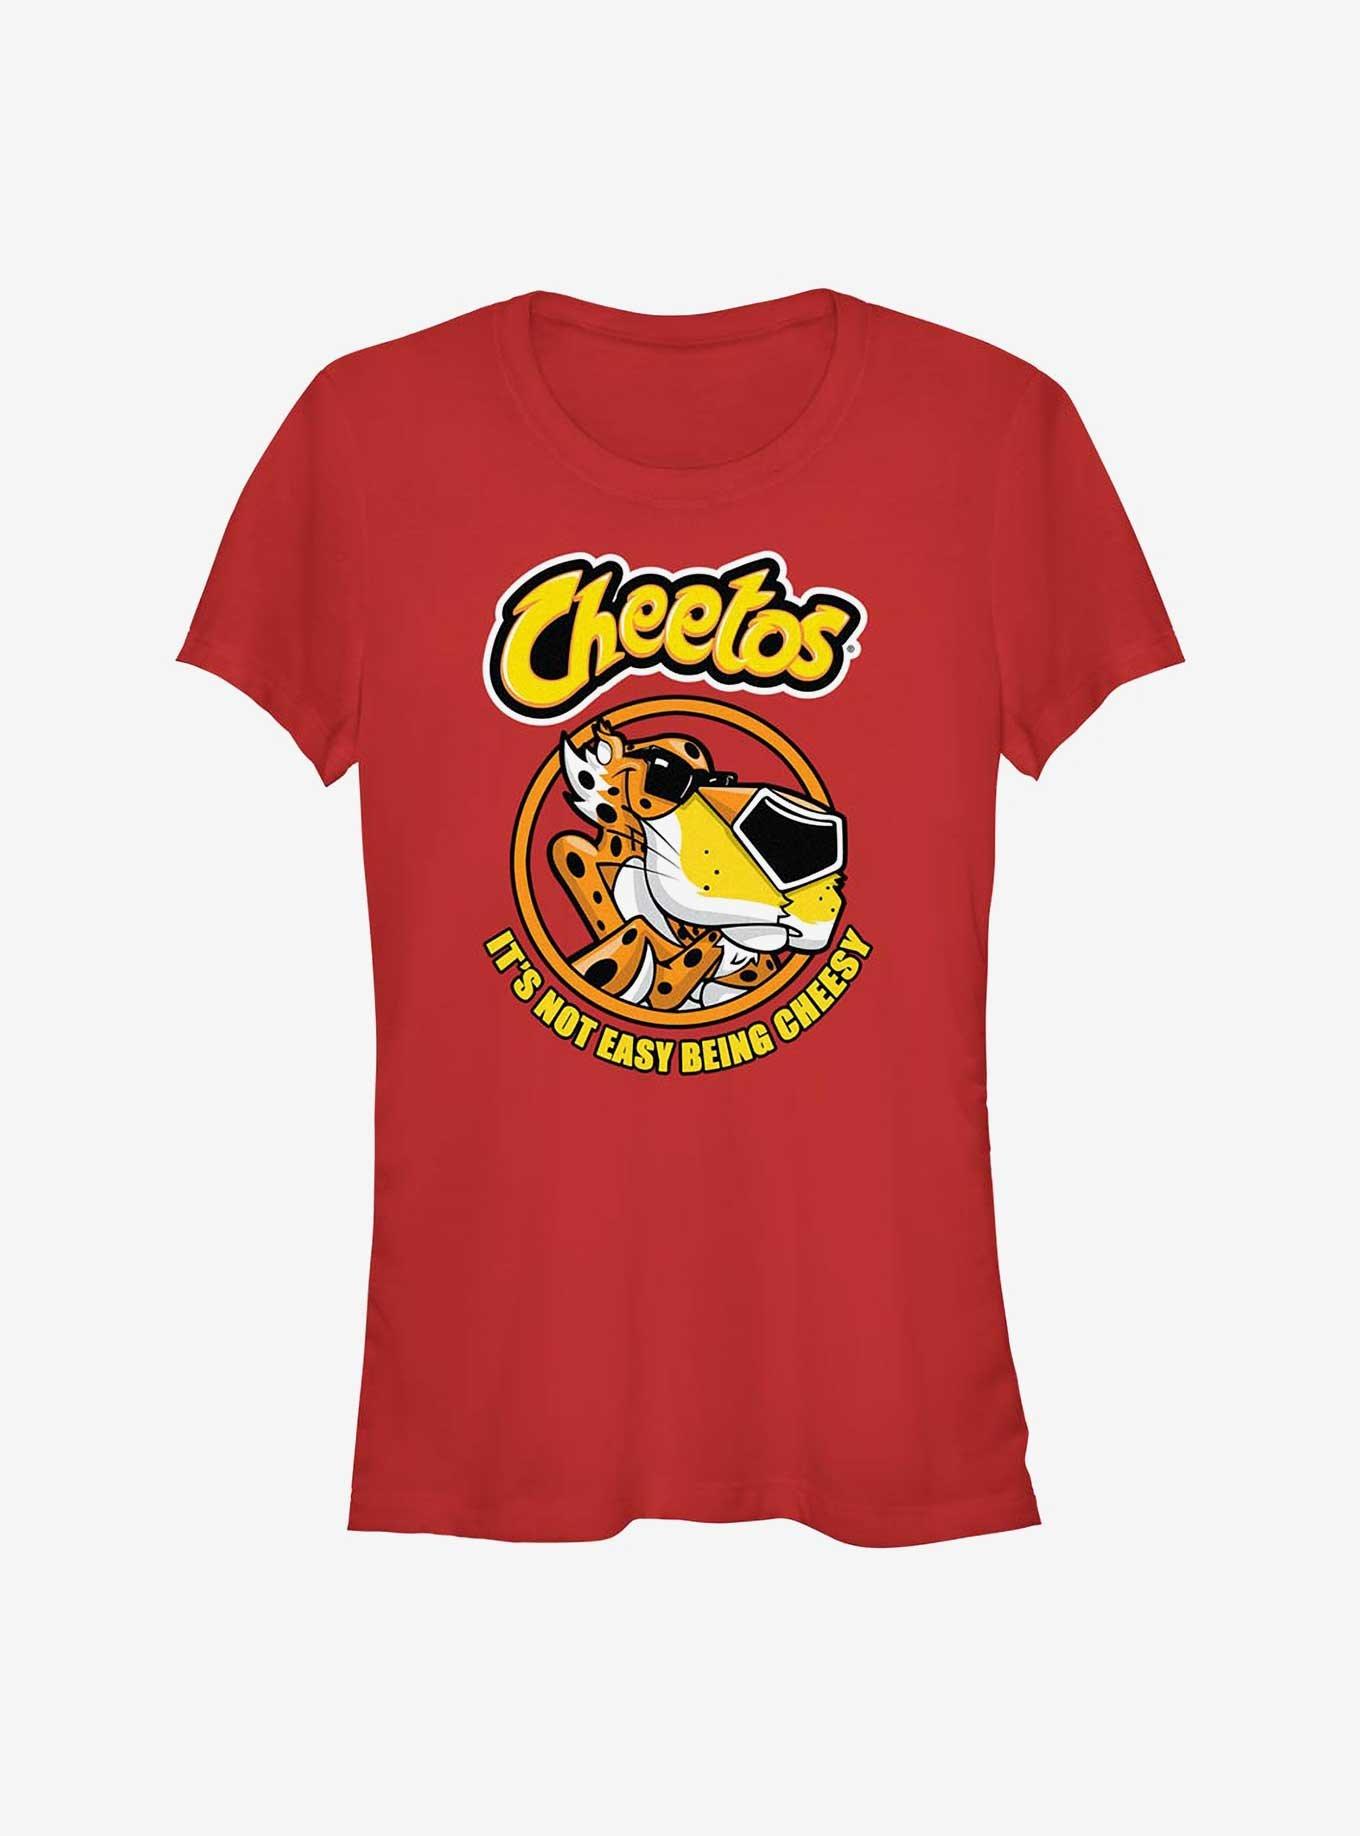 Cheetos Mr. Chester Girls T-Shirt, RED, hi-res